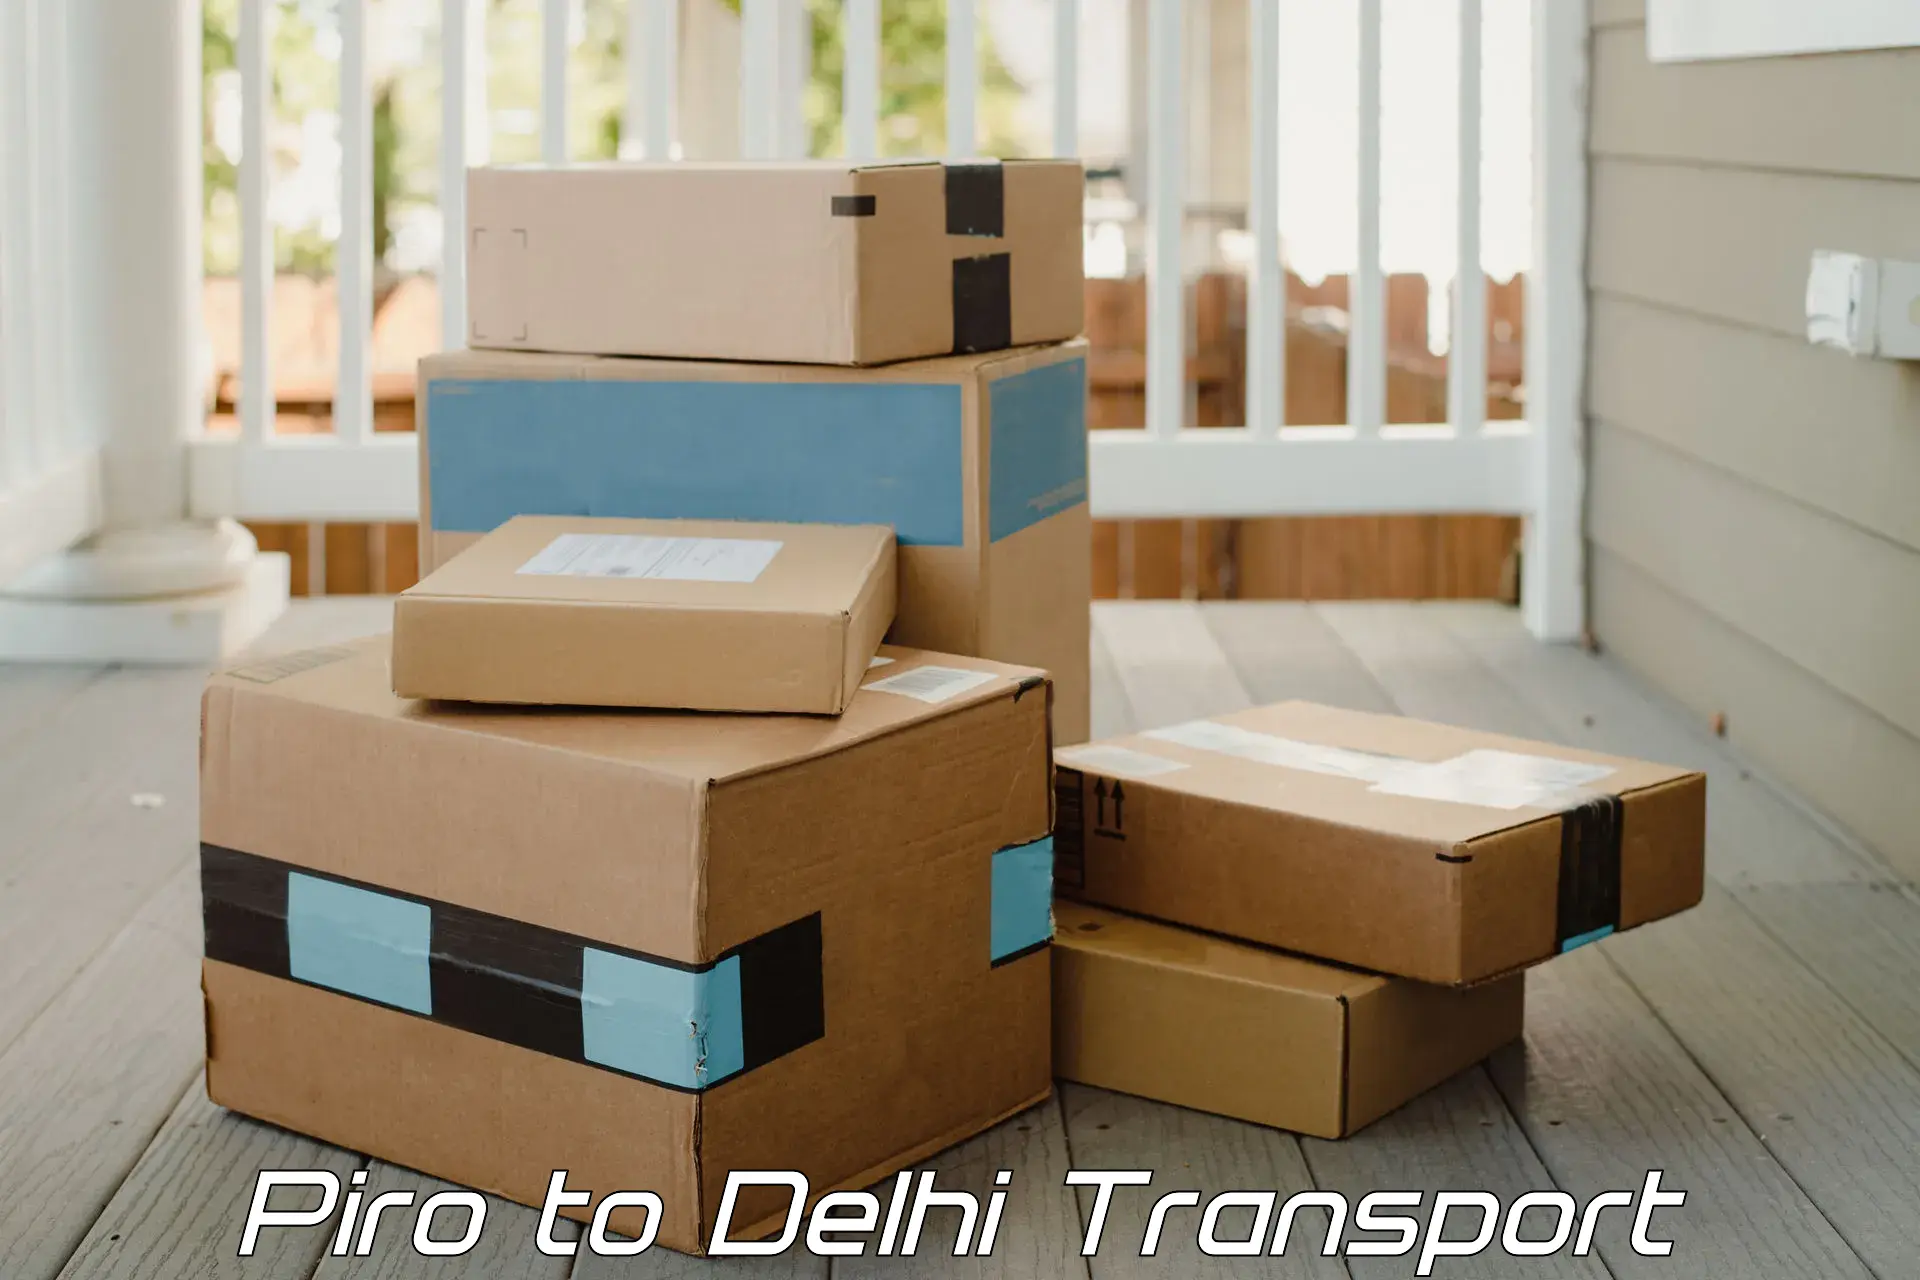 Daily transport service Piro to Lodhi Road